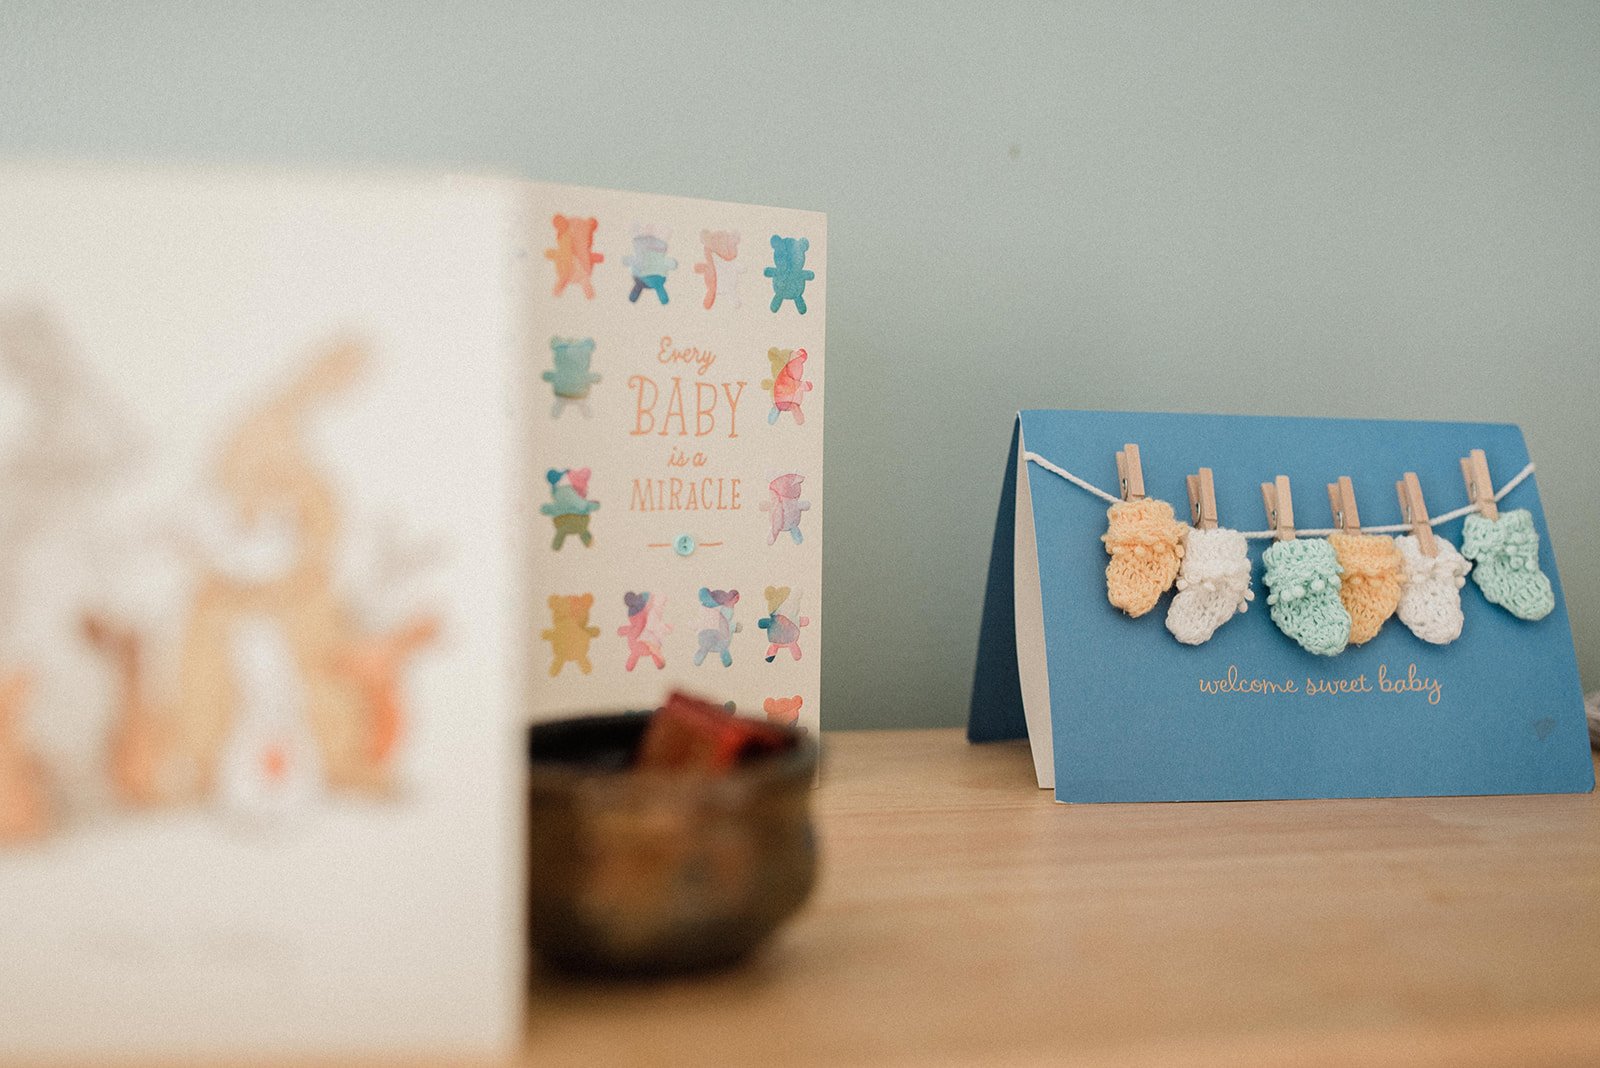 cute cards for baby's arrival displaying in the nursery